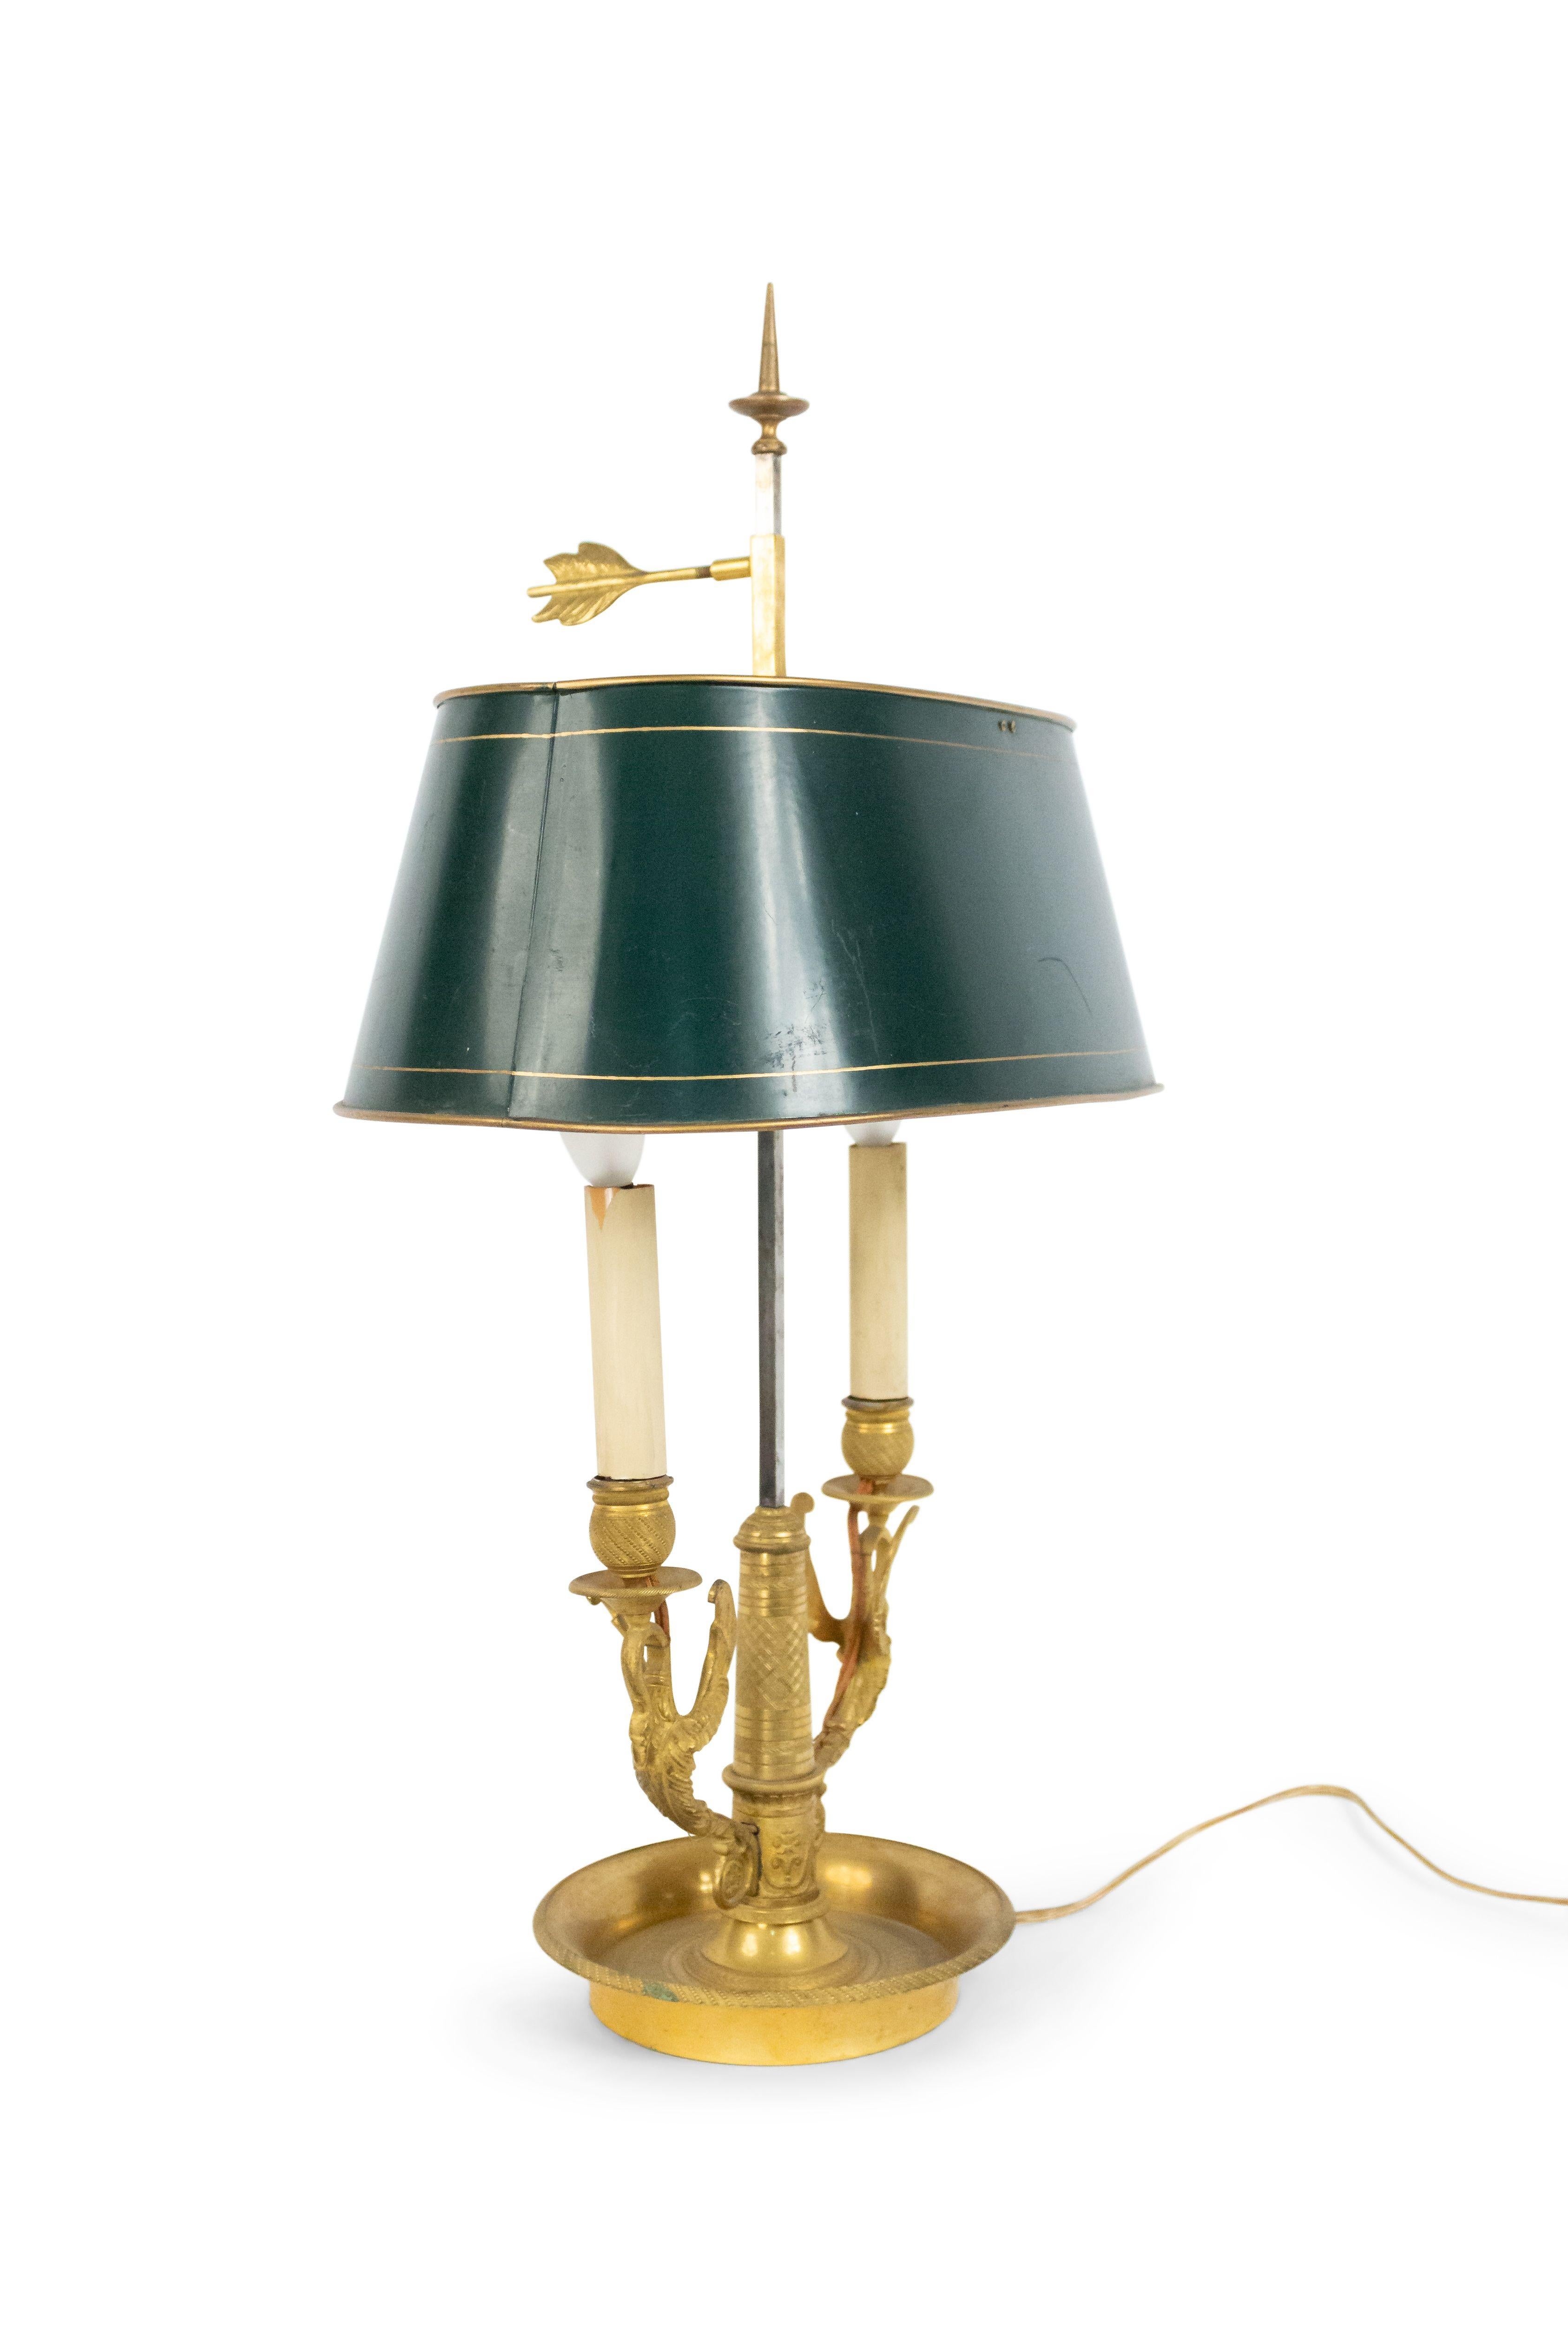 French Empire style 20th century bronze doré 2 swan arm round base bouillotte table lamp with oval green tole shade.